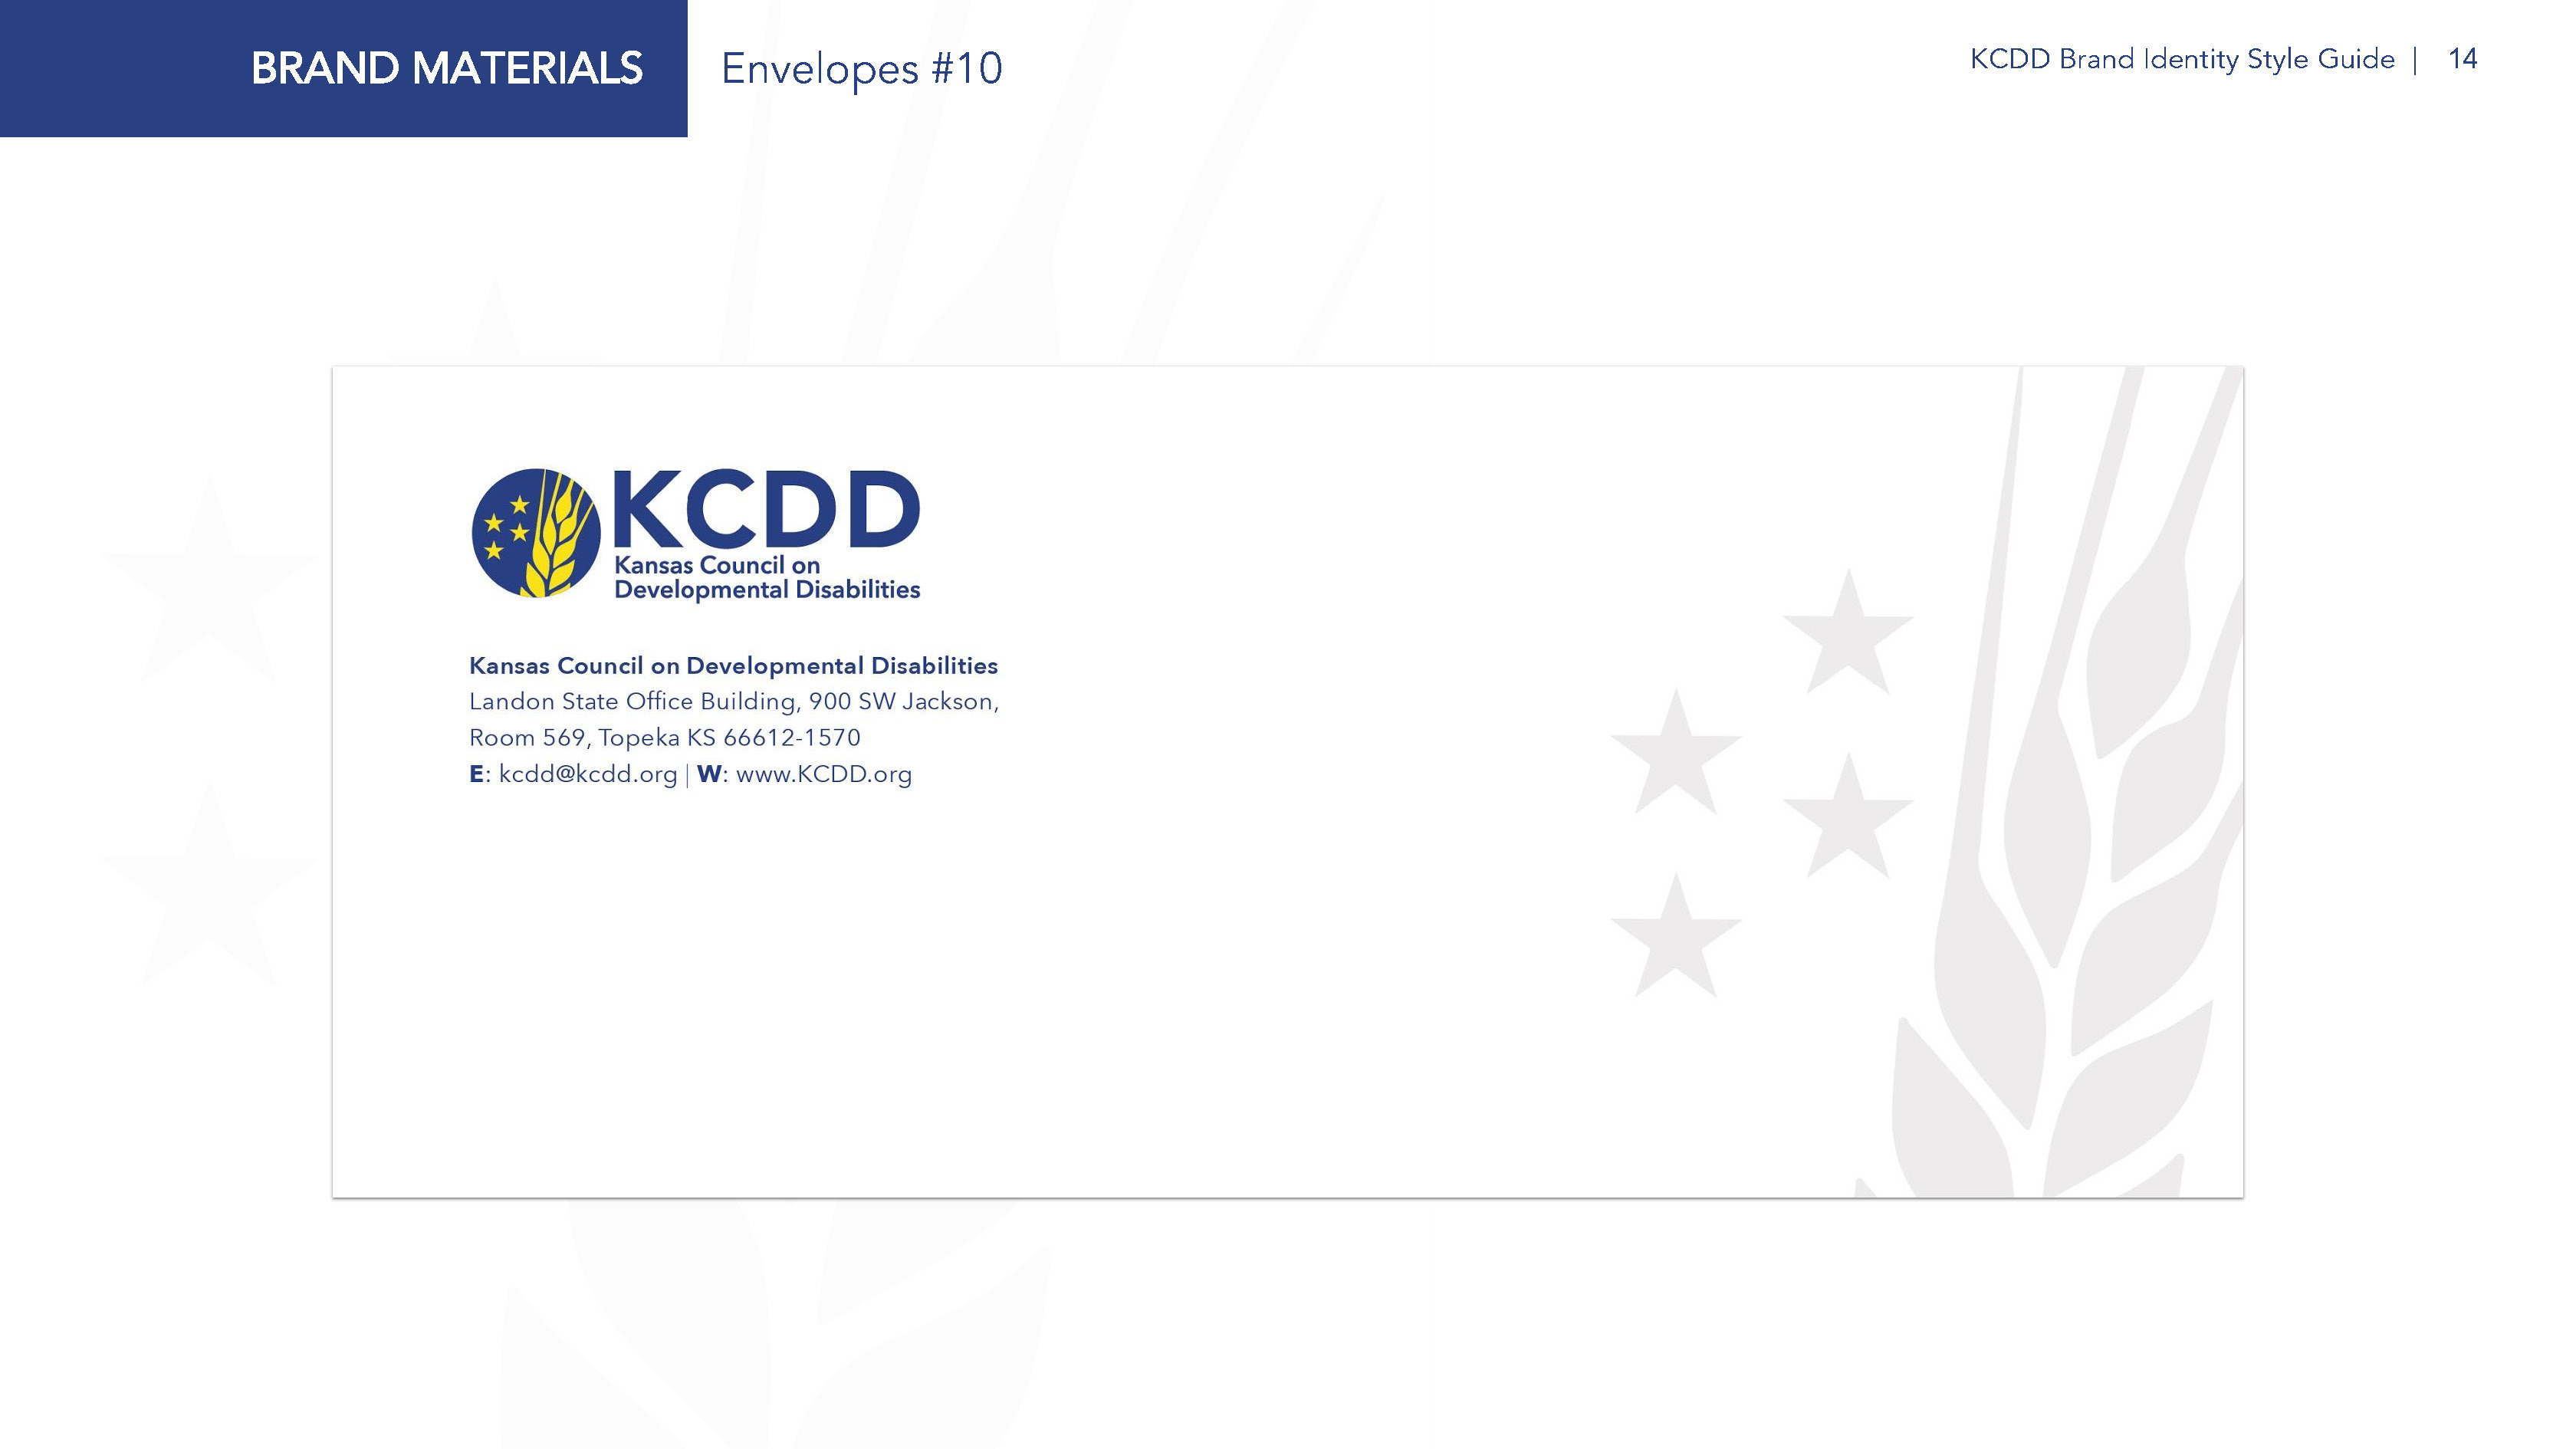 KCDD - KCDD Brand Identity Style Guide Page 14 - New Minds Group